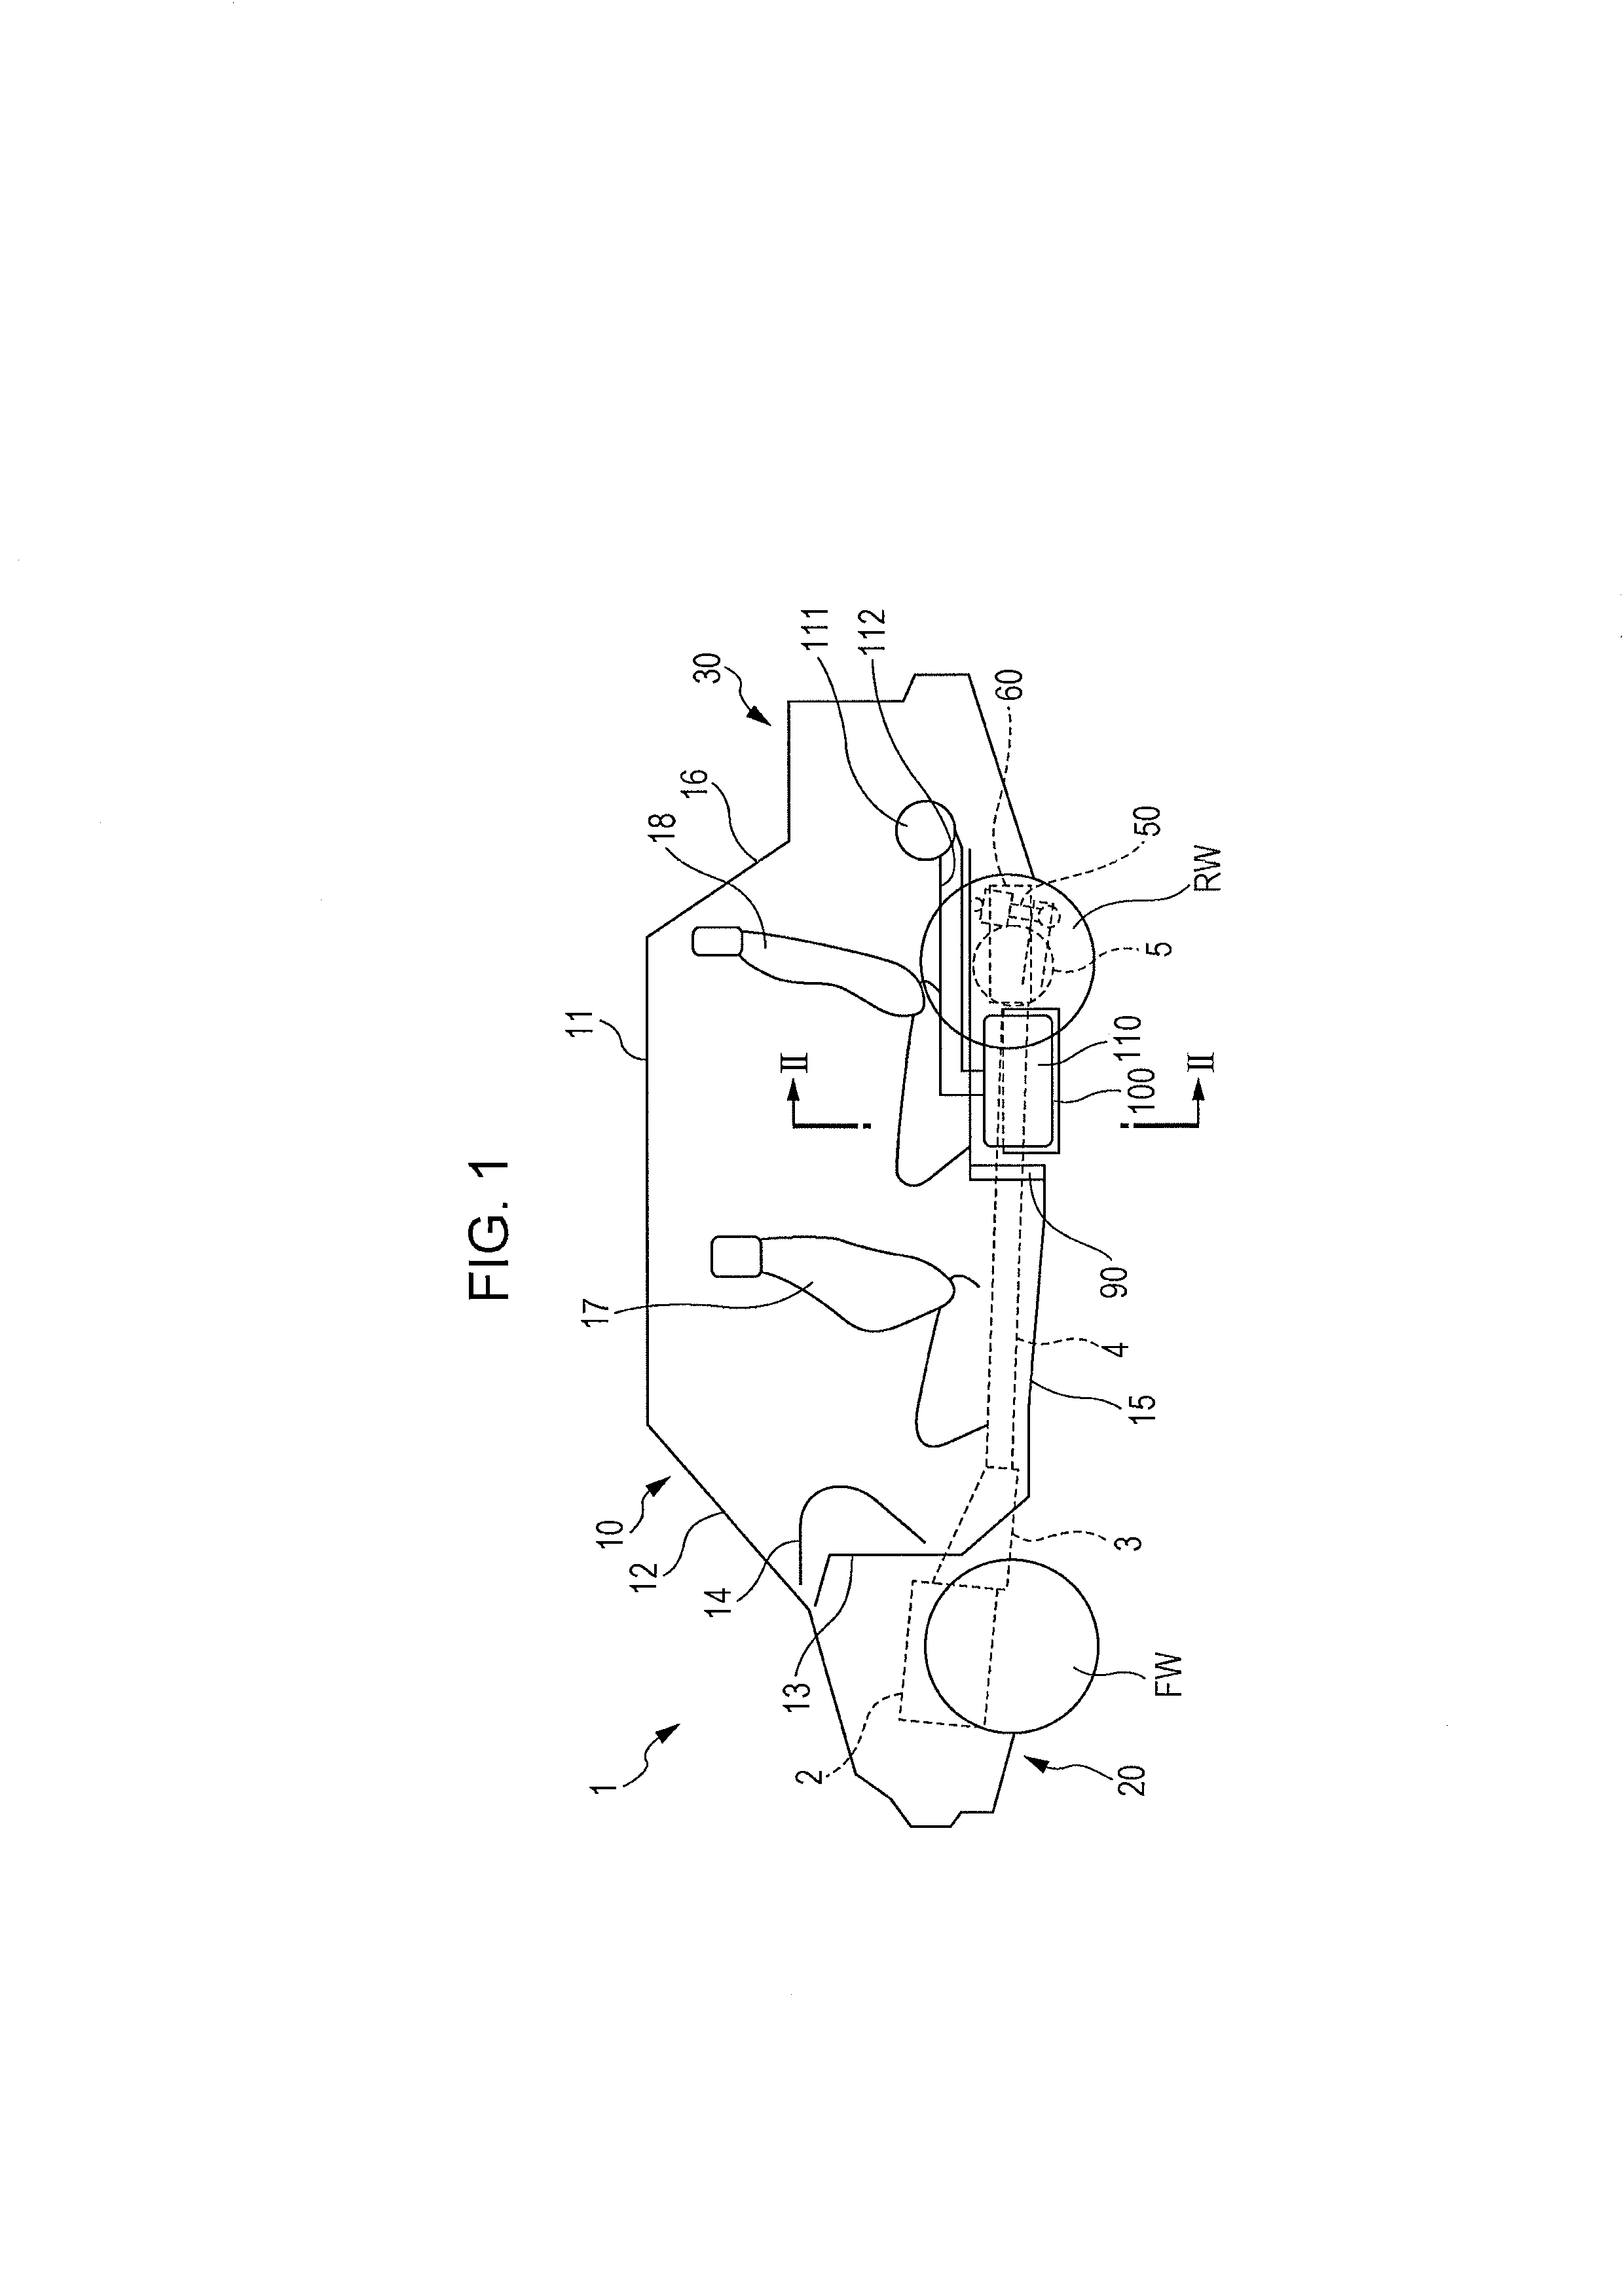 Mounting structure for battery and fuel tank of gasoline-electric hybrid vehicle